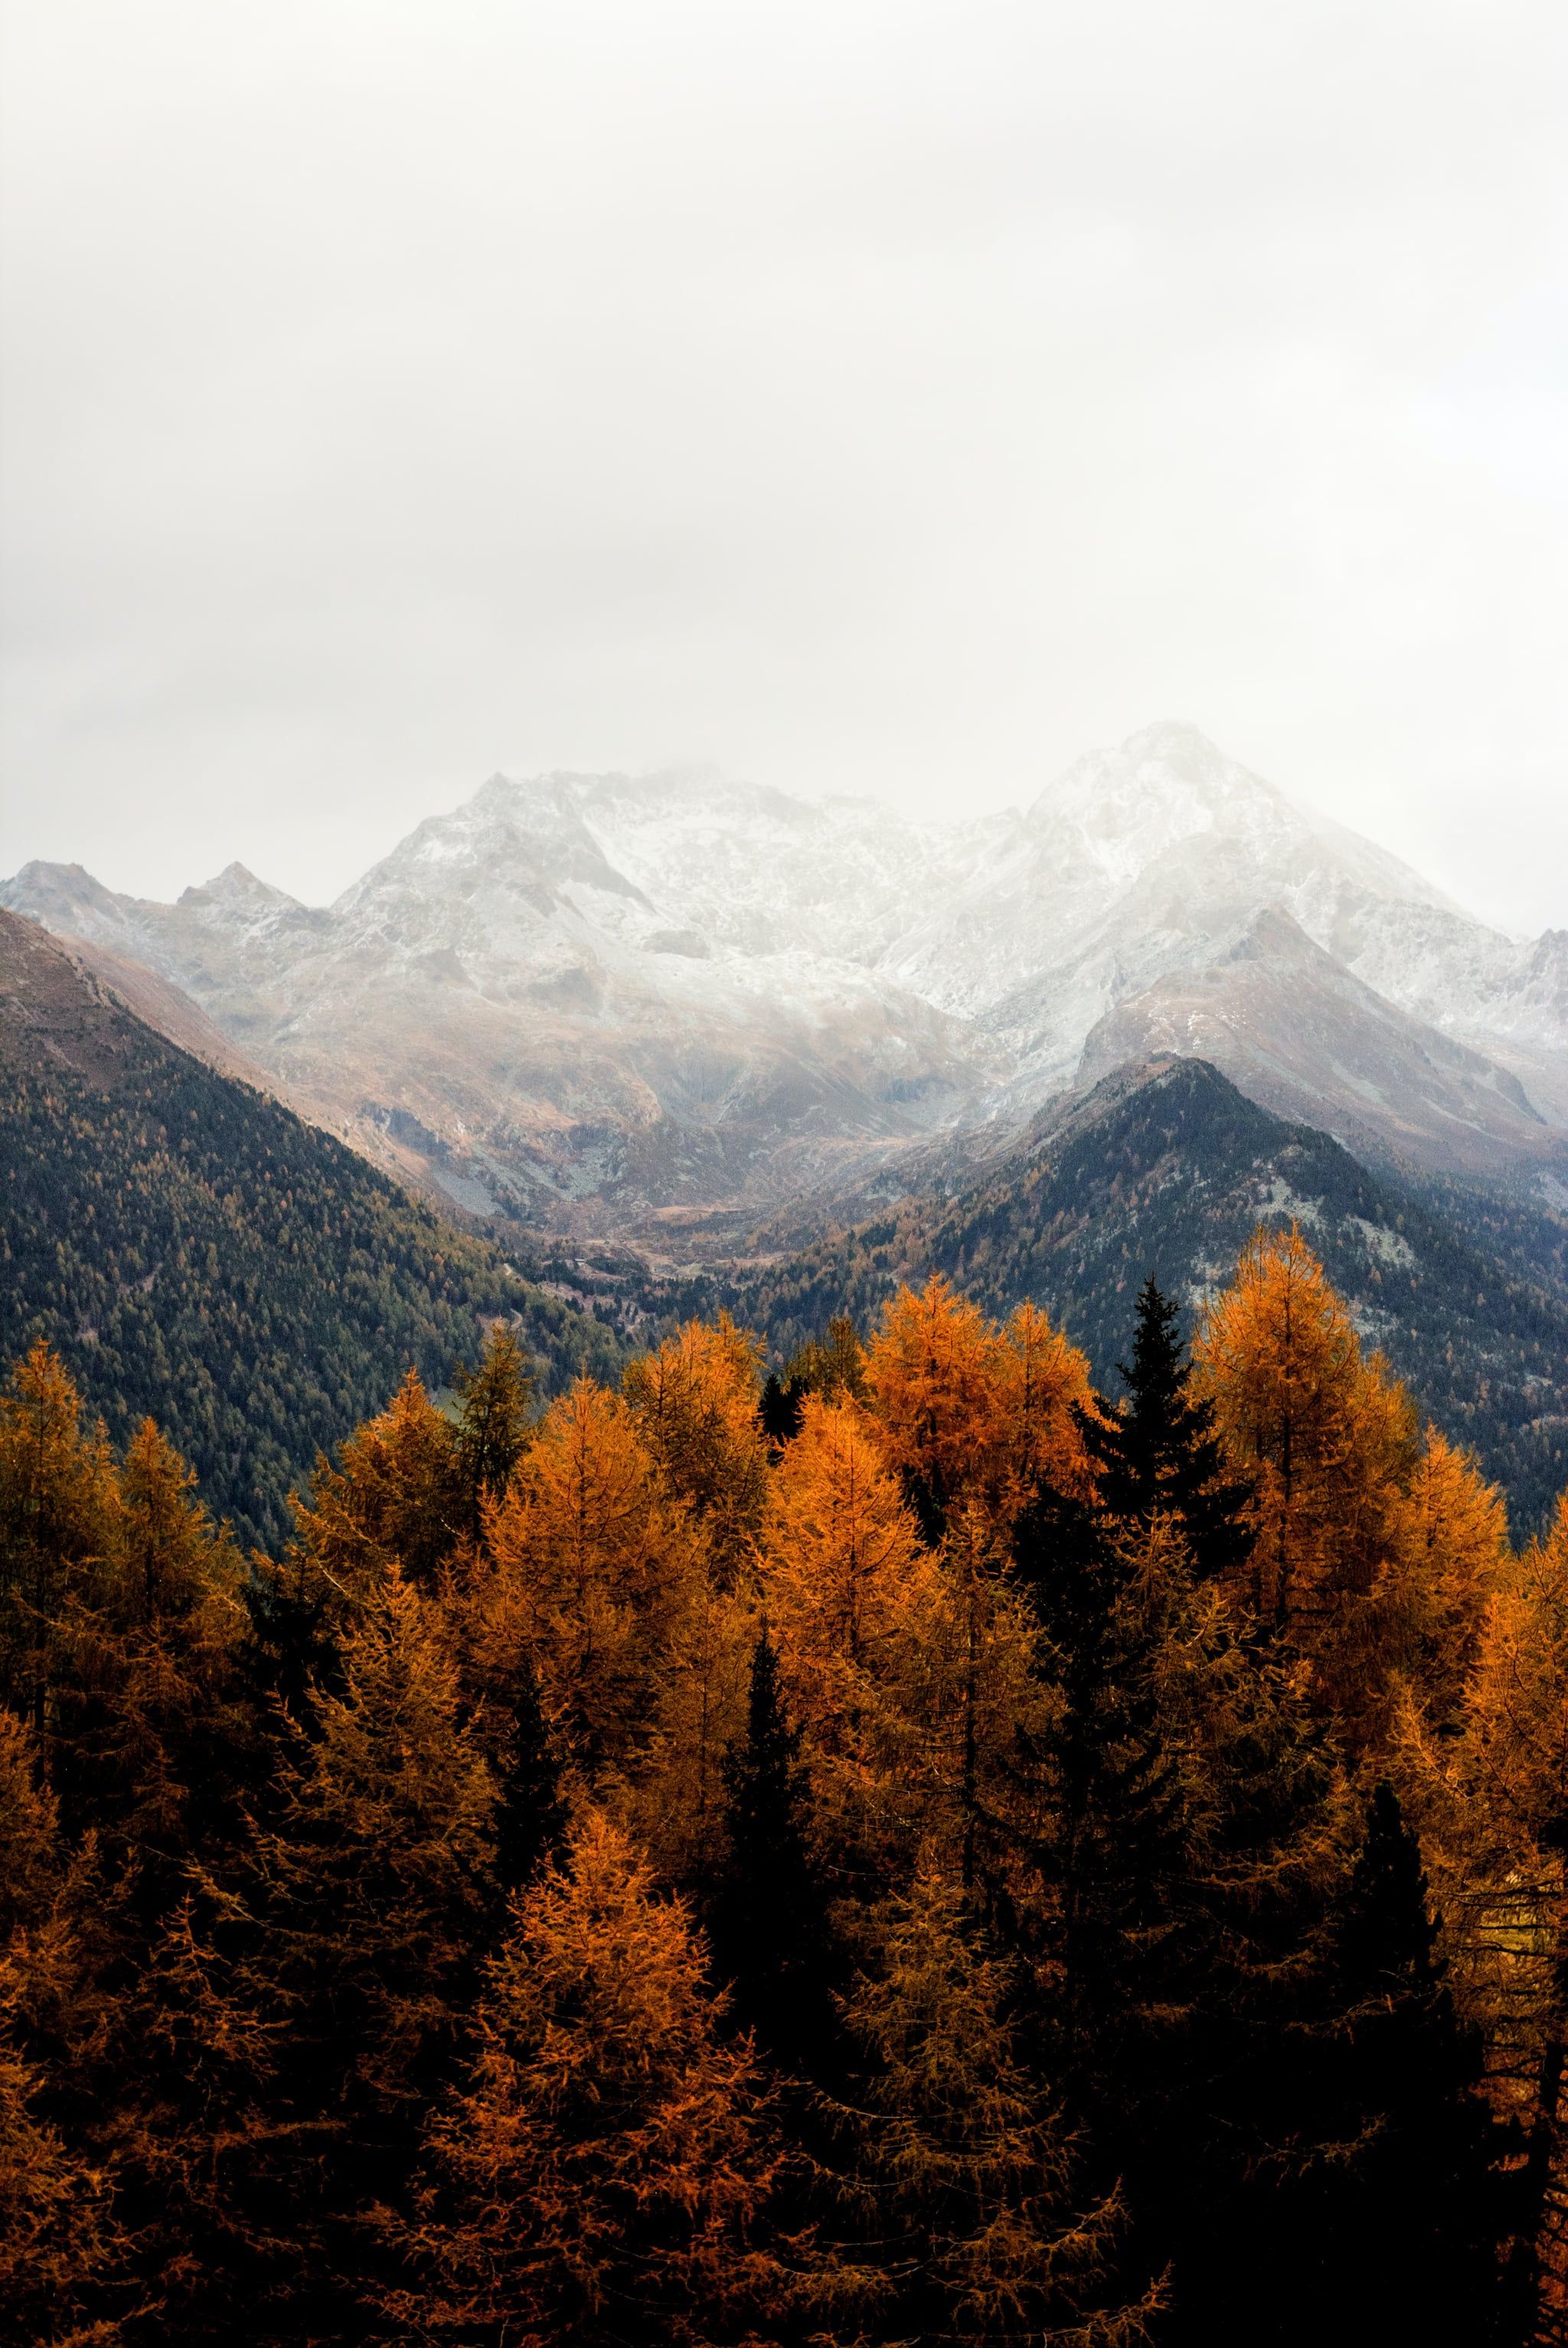 Fall Background: Mountain iPhone Wallpaper Fall iPhone Wallpaper That'll Instantly Make You Feel Cozy